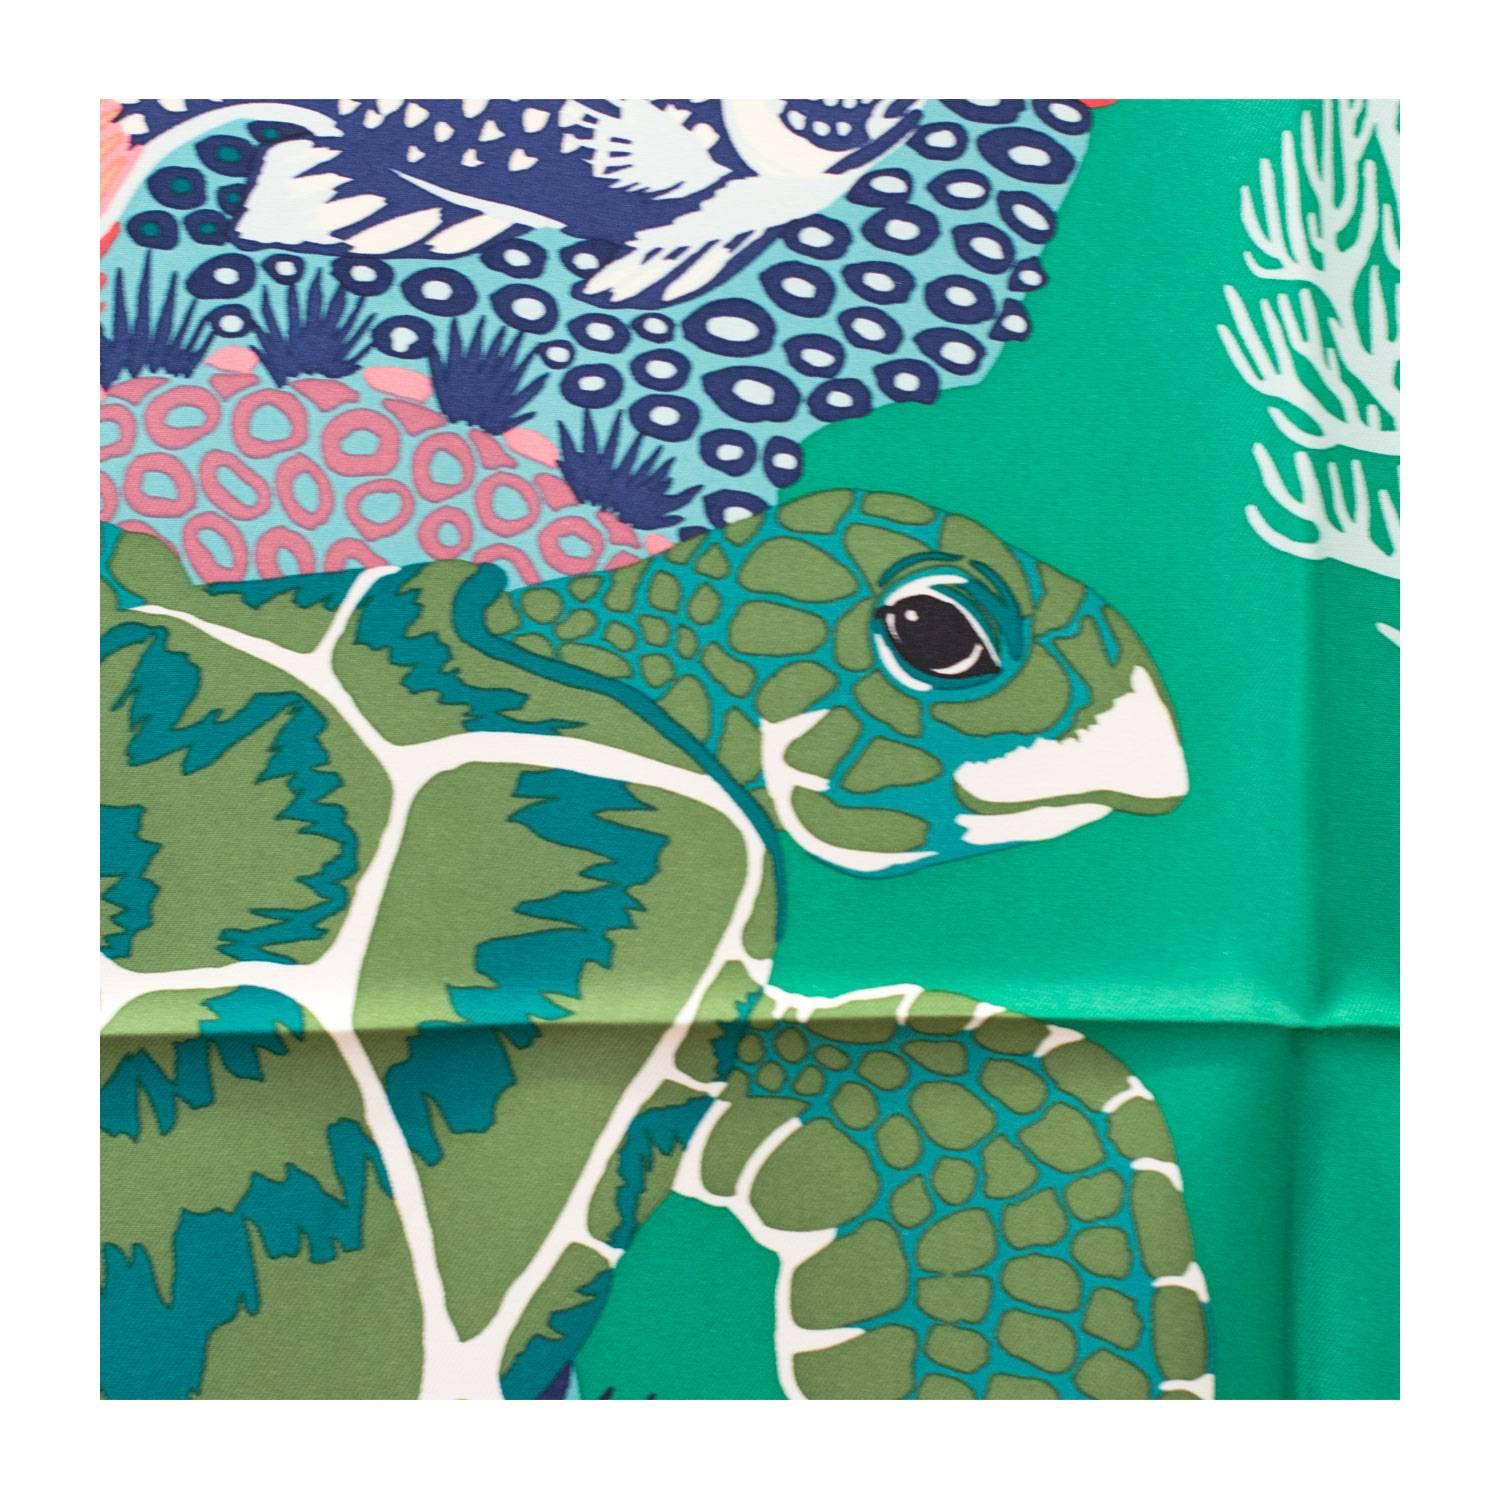 Hermes  Carre Twill 100% Silk UNDER THE WAVES VERT/CORAIL/AQUA 2016

Bought it in hermès store in 2016.

Pre-owned and never used

Composition:100% Silk

Size: 90x90cm

Model: UNDER THE WAVES.

Color:  VERT/CORAIL/AQUA.

This scarf